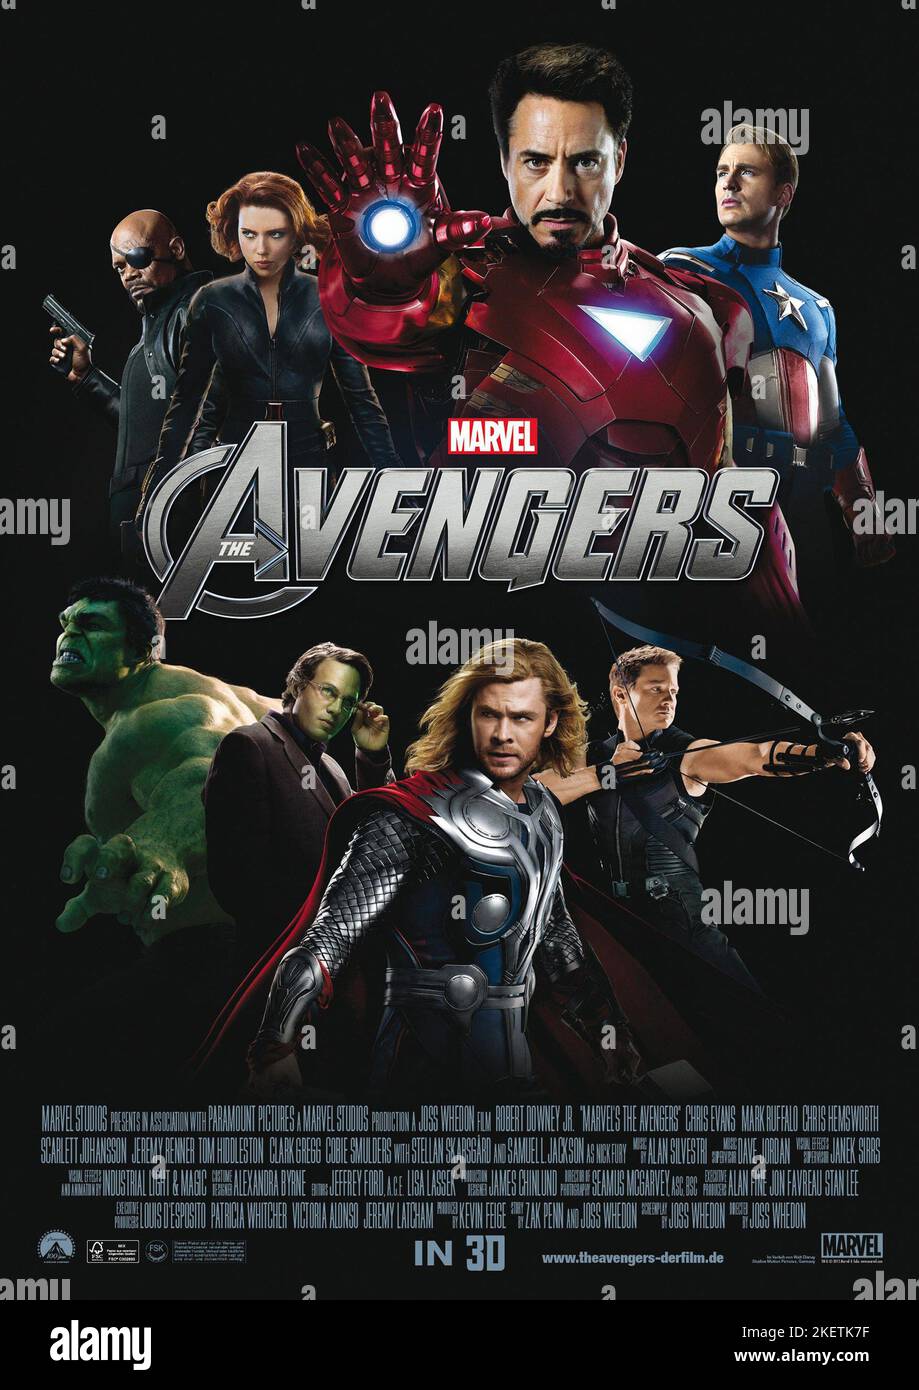 The Avengers Year : 2012 USA  Director : Joss Whedon  Movie poster  (USA) Restricted to editorial use. See caption for more information about restrictions.  It is forbidden to reproduce the photograph out of context of the promotion of the film. It must be credited to the Film Company and/or the photographer assigned by or authorized by/allowed on the set by the Film Company. Restricted to Editorial Use. Photo12 does not grant publicity rights of the persons represented. Stock Photo